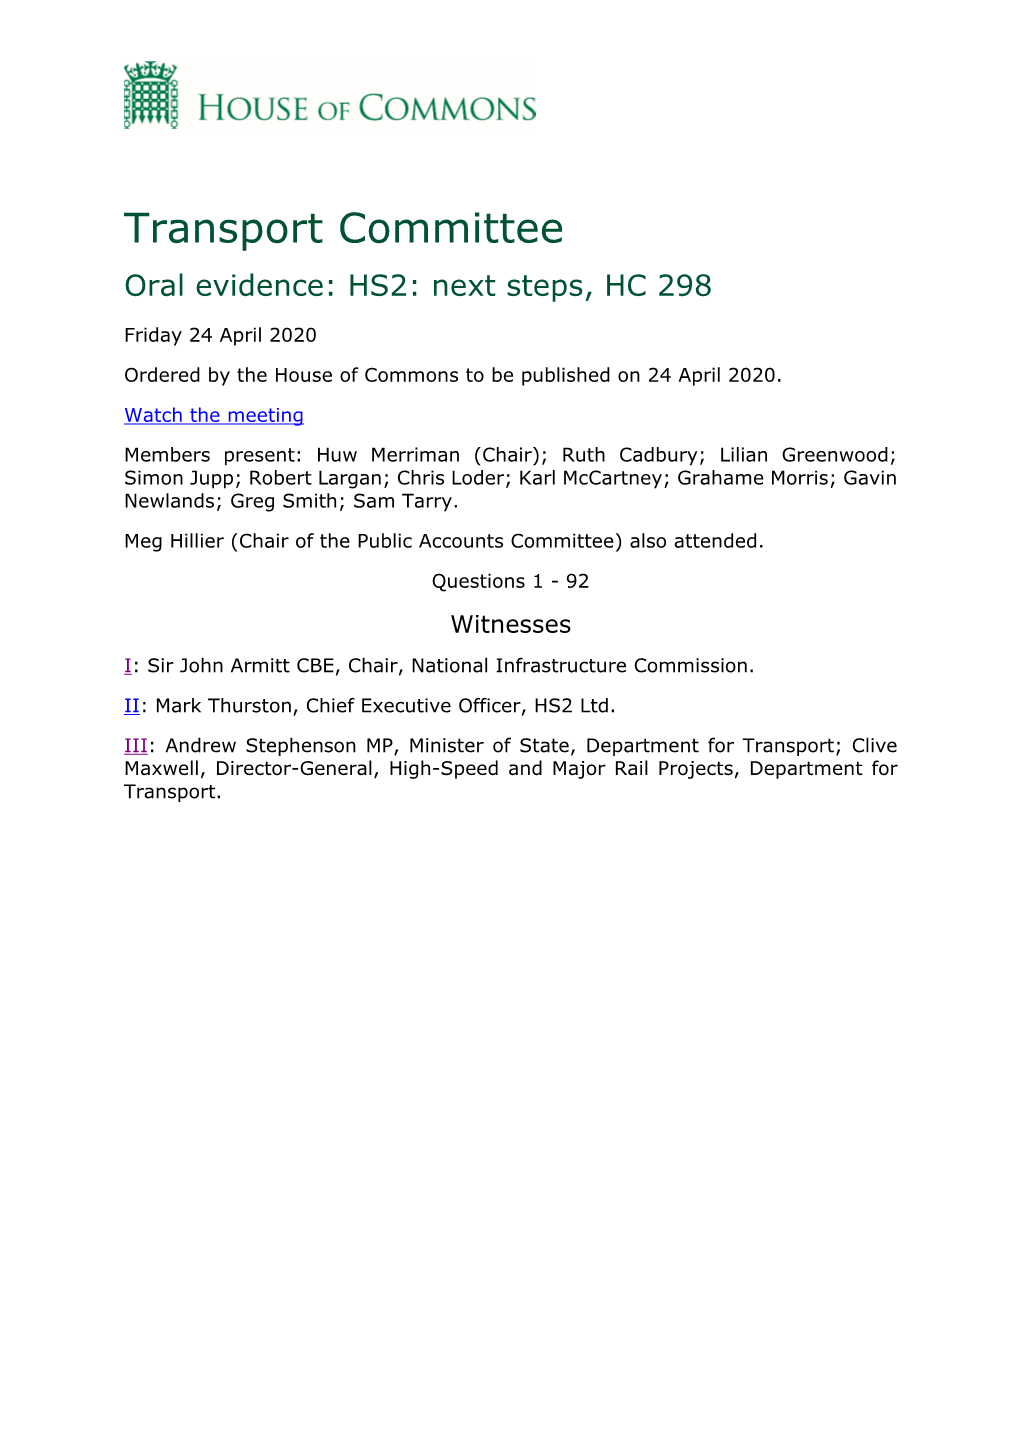 Transport Committee Oral Evidence: HS2: Next Steps, HC 298